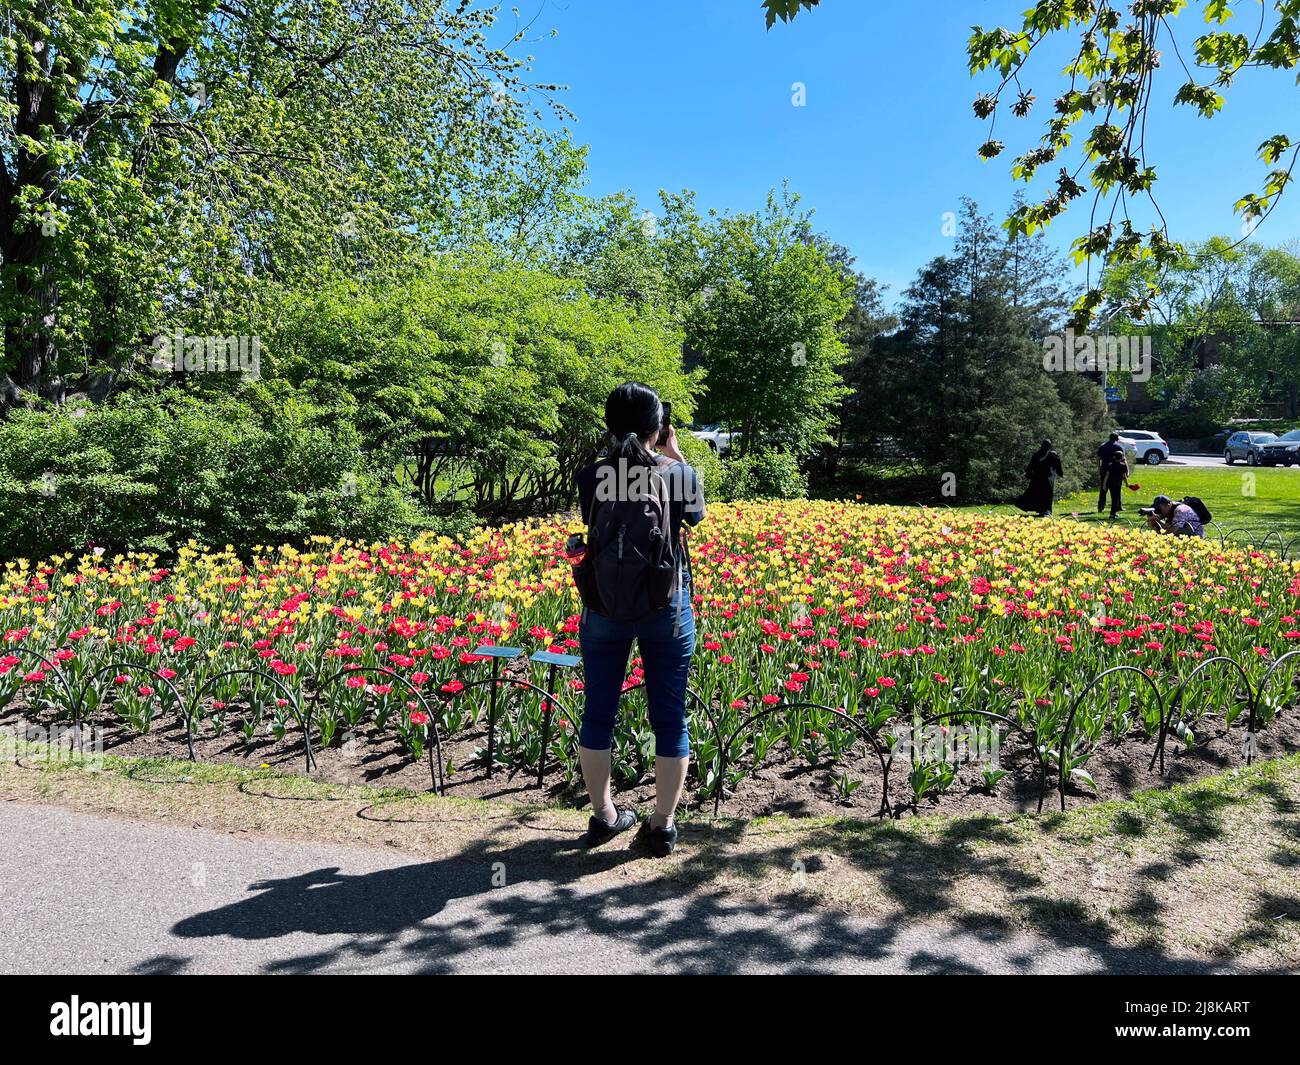 A photographer captures an image at the Ottawa Tulip Festival in Ontario, Canada. Stock Photo